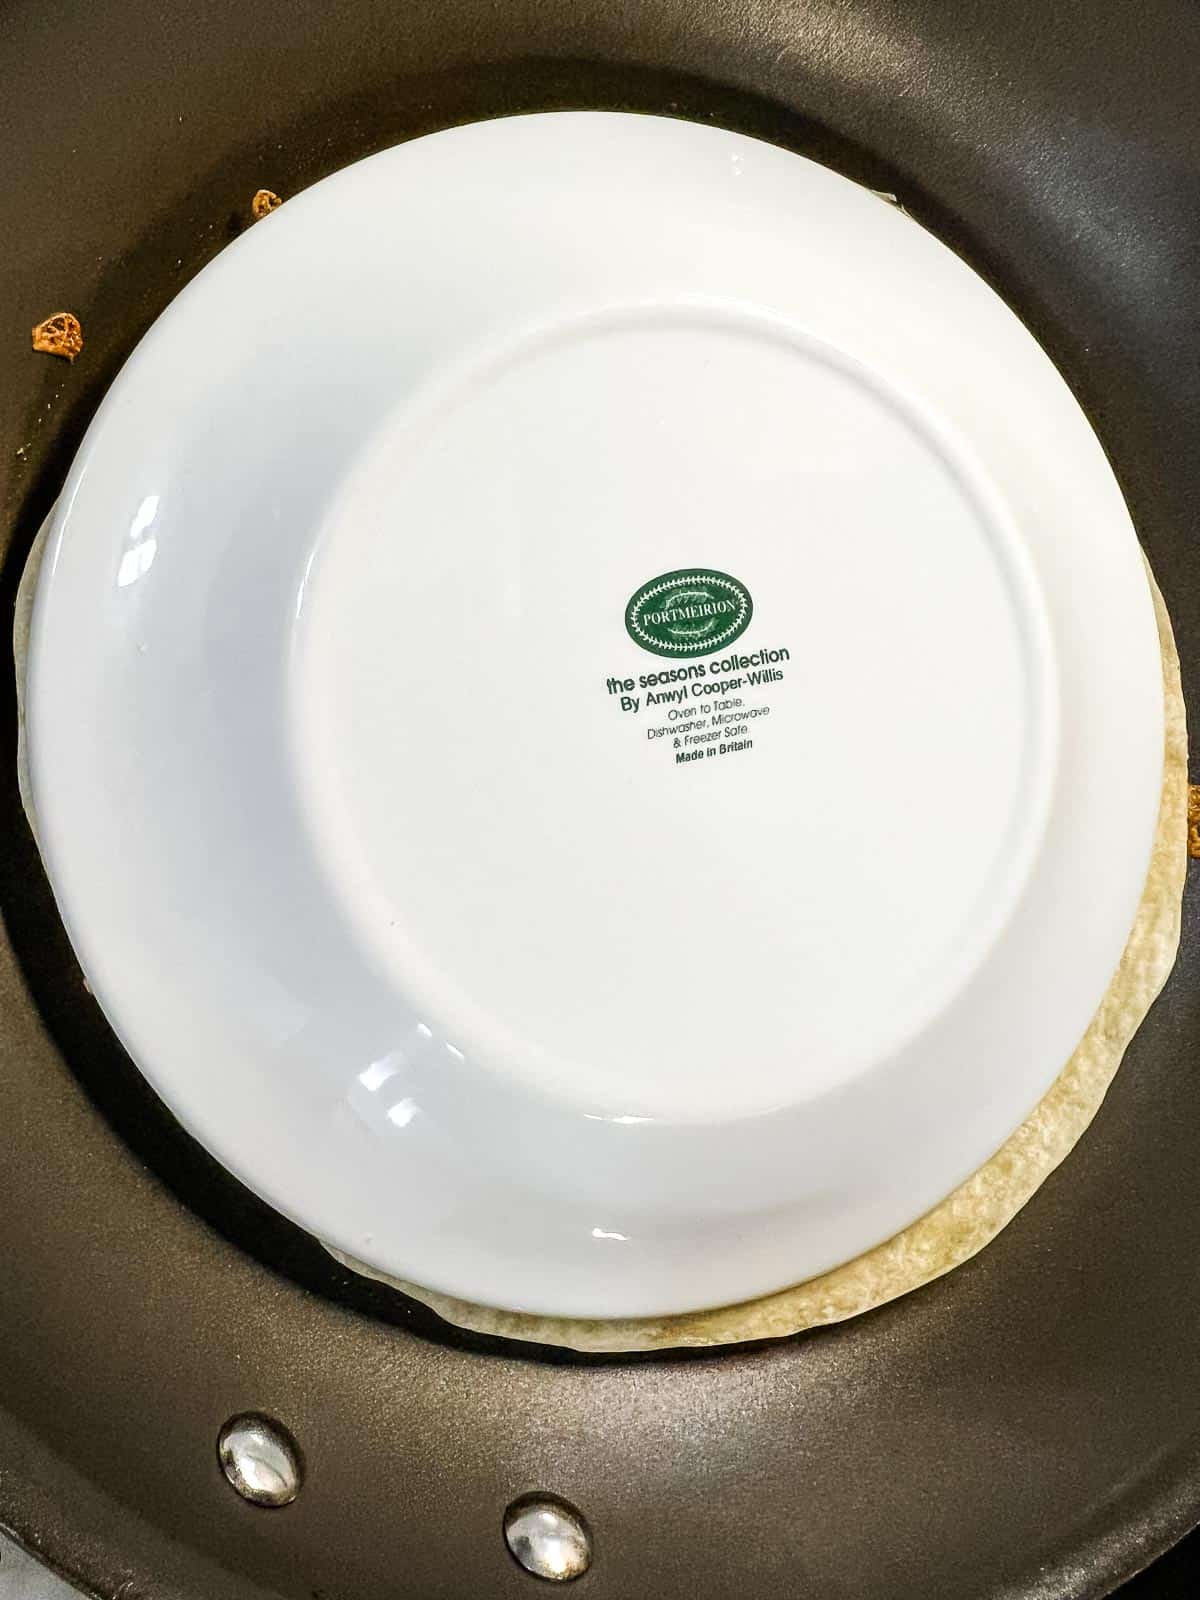 Use an inverted plate to flip the quesadilla.